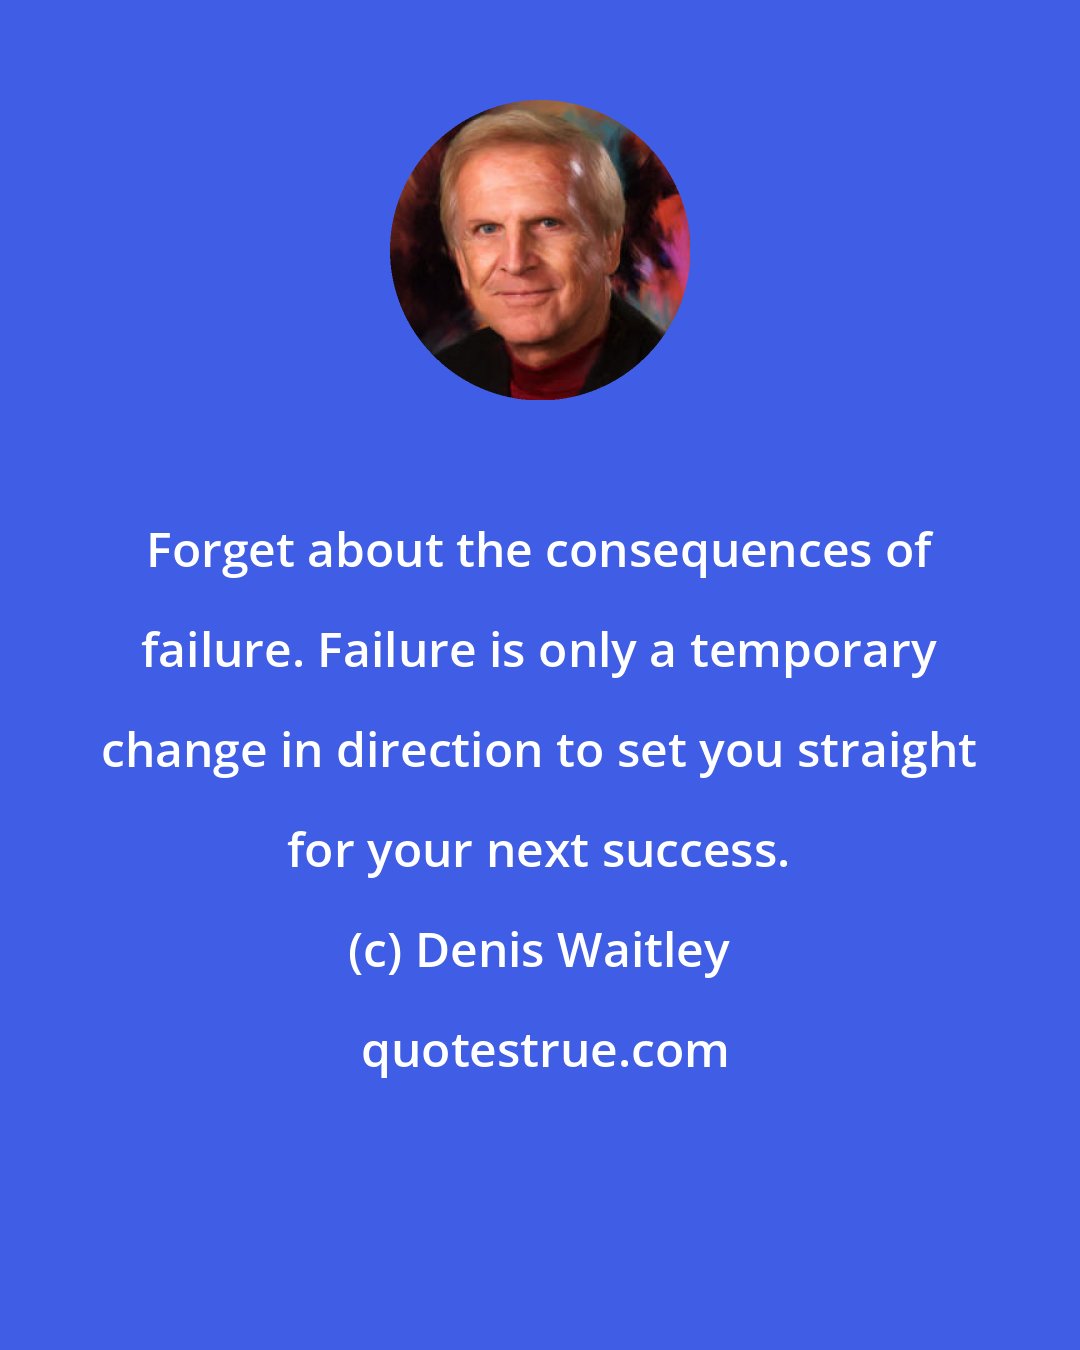 Denis Waitley: Forget about the consequences of failure. Failure is only a temporary change in direction to set you straight for your next success.